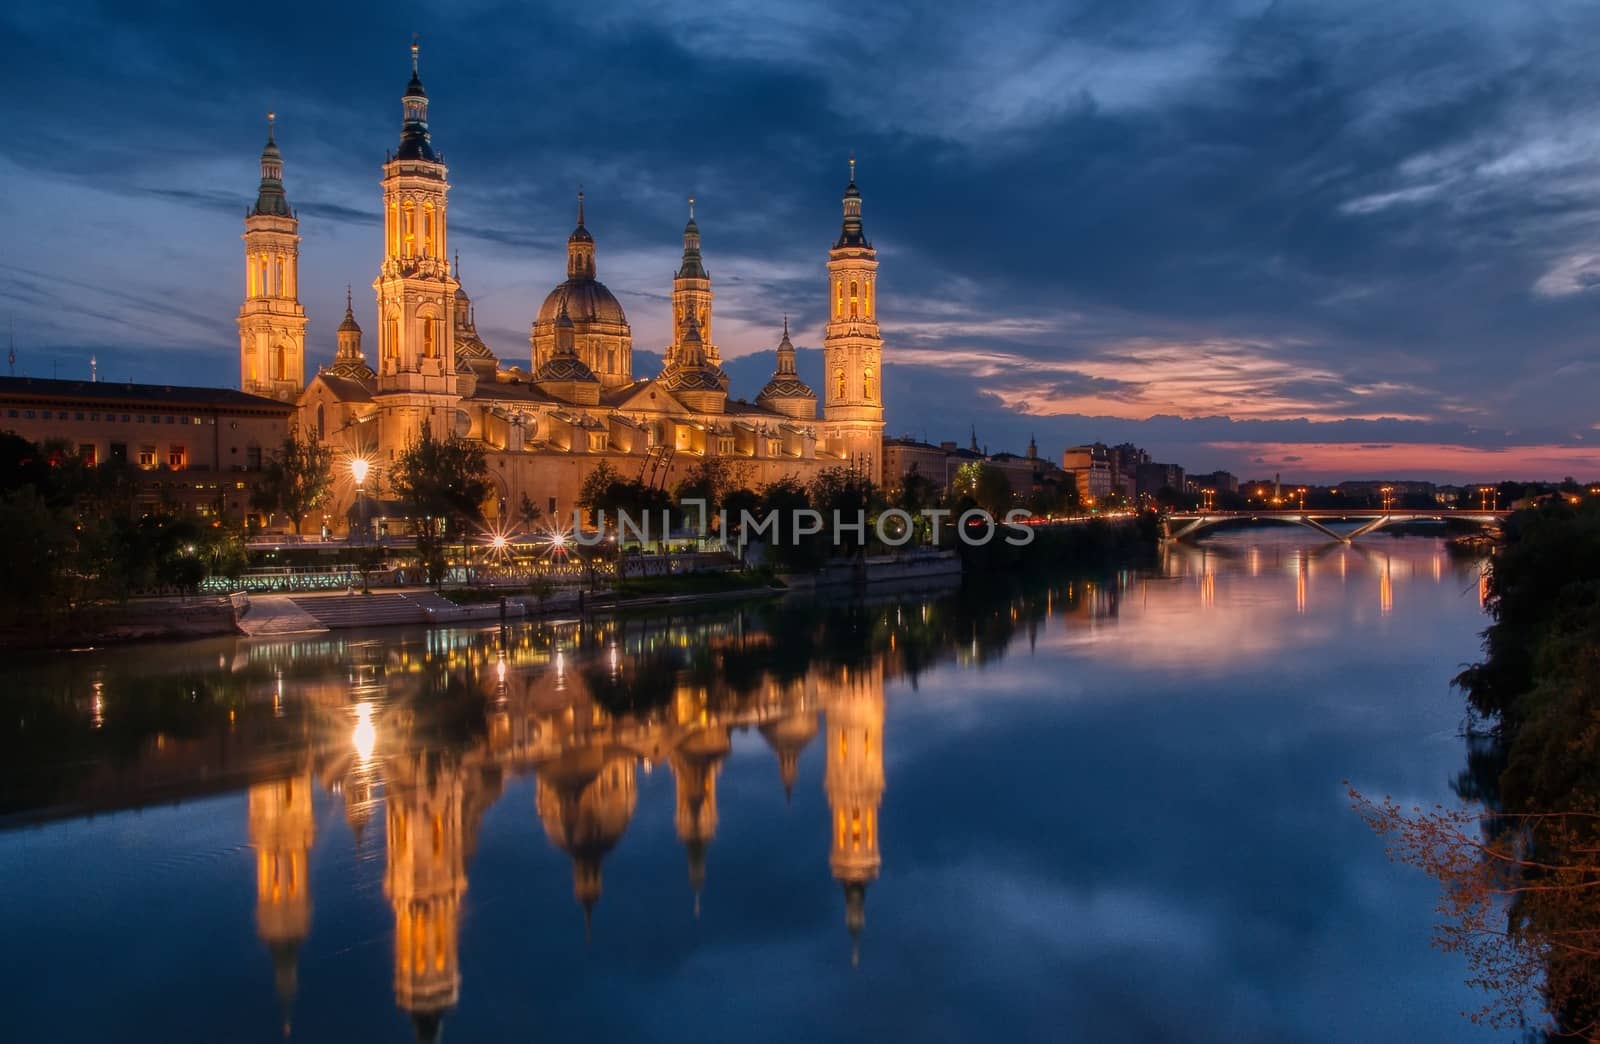 Basilica of our Lady of the Pillar and Ebro river in the evening, Zaragoza, Aragon, Spain.